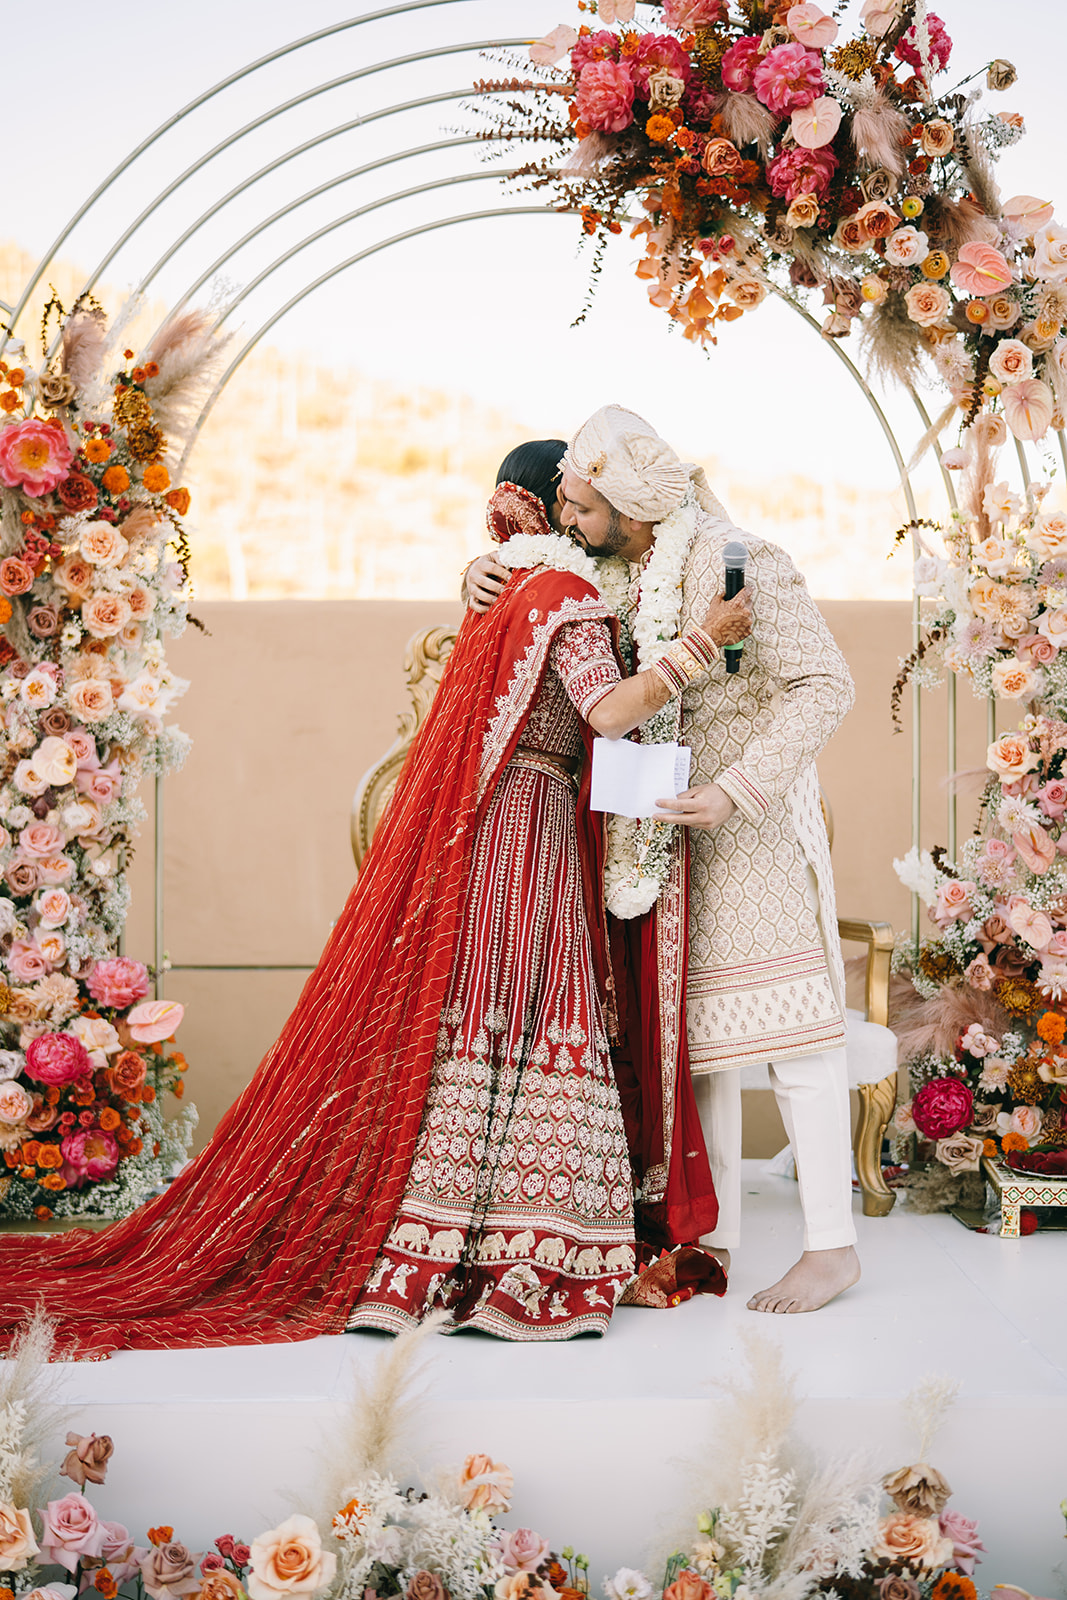 Indian bride and groom embracing underflower arch